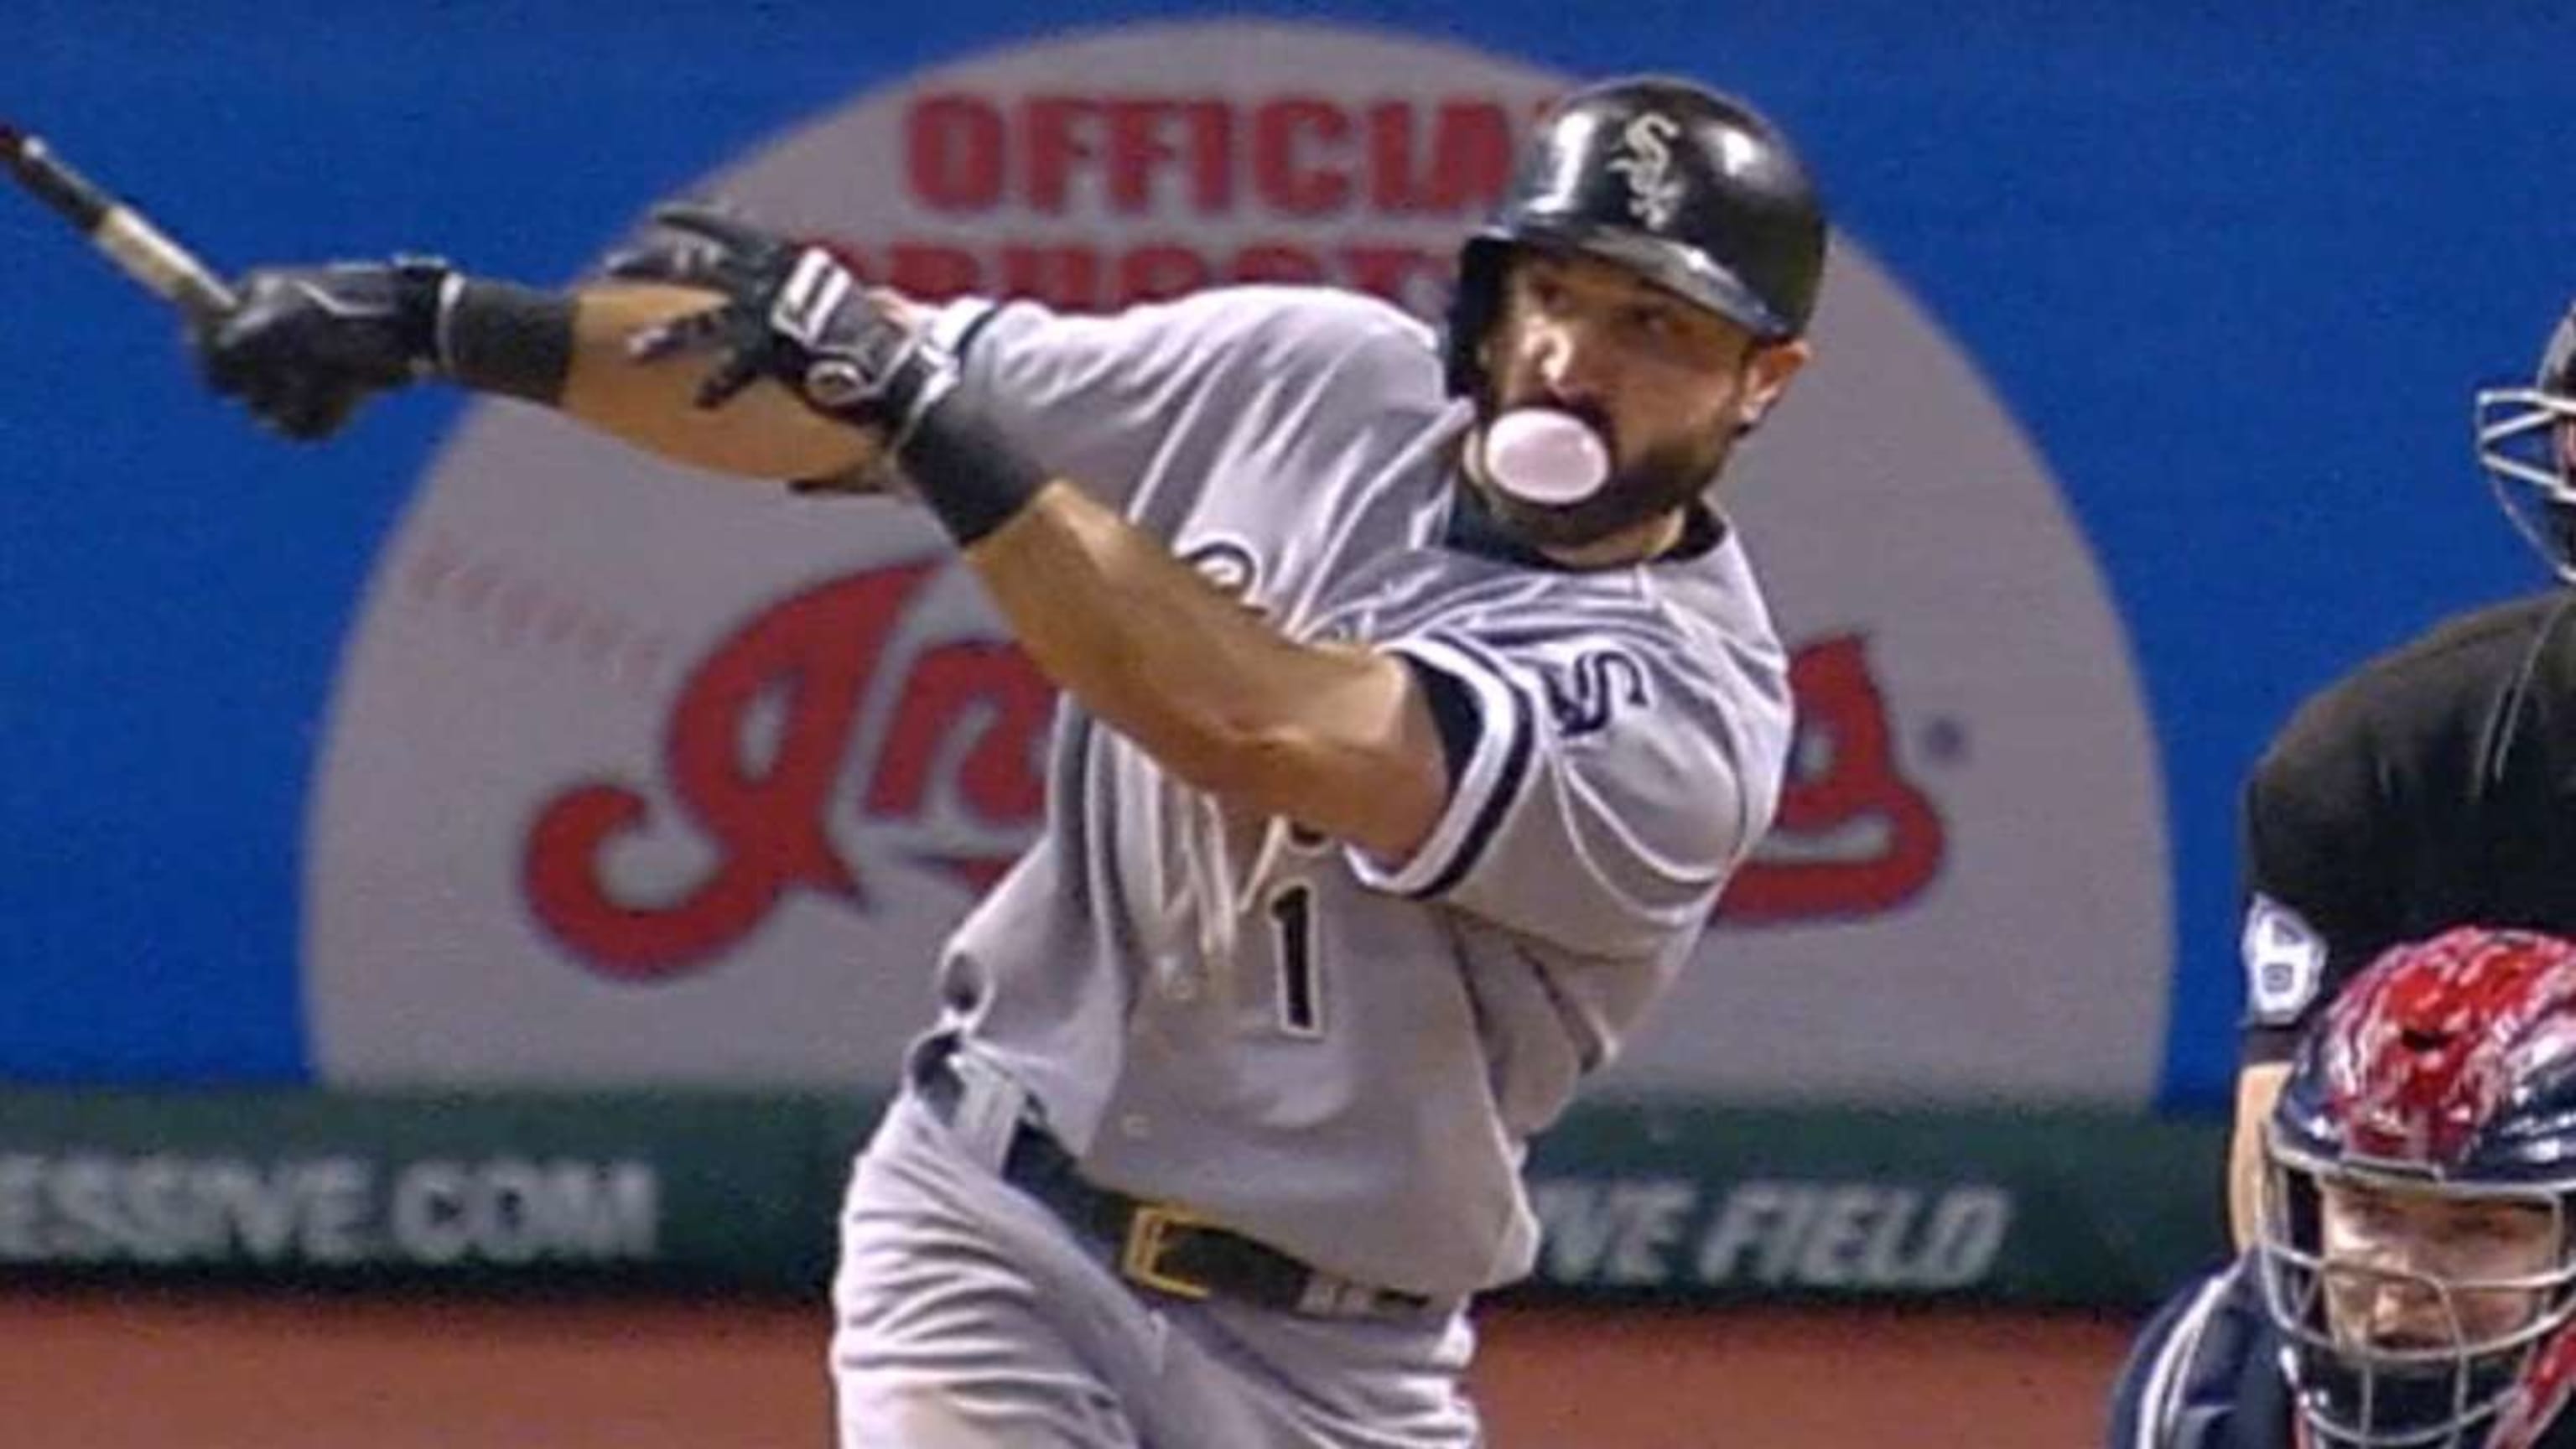 New' Adam Eaton wrongly receives big paychecks meant for 'old